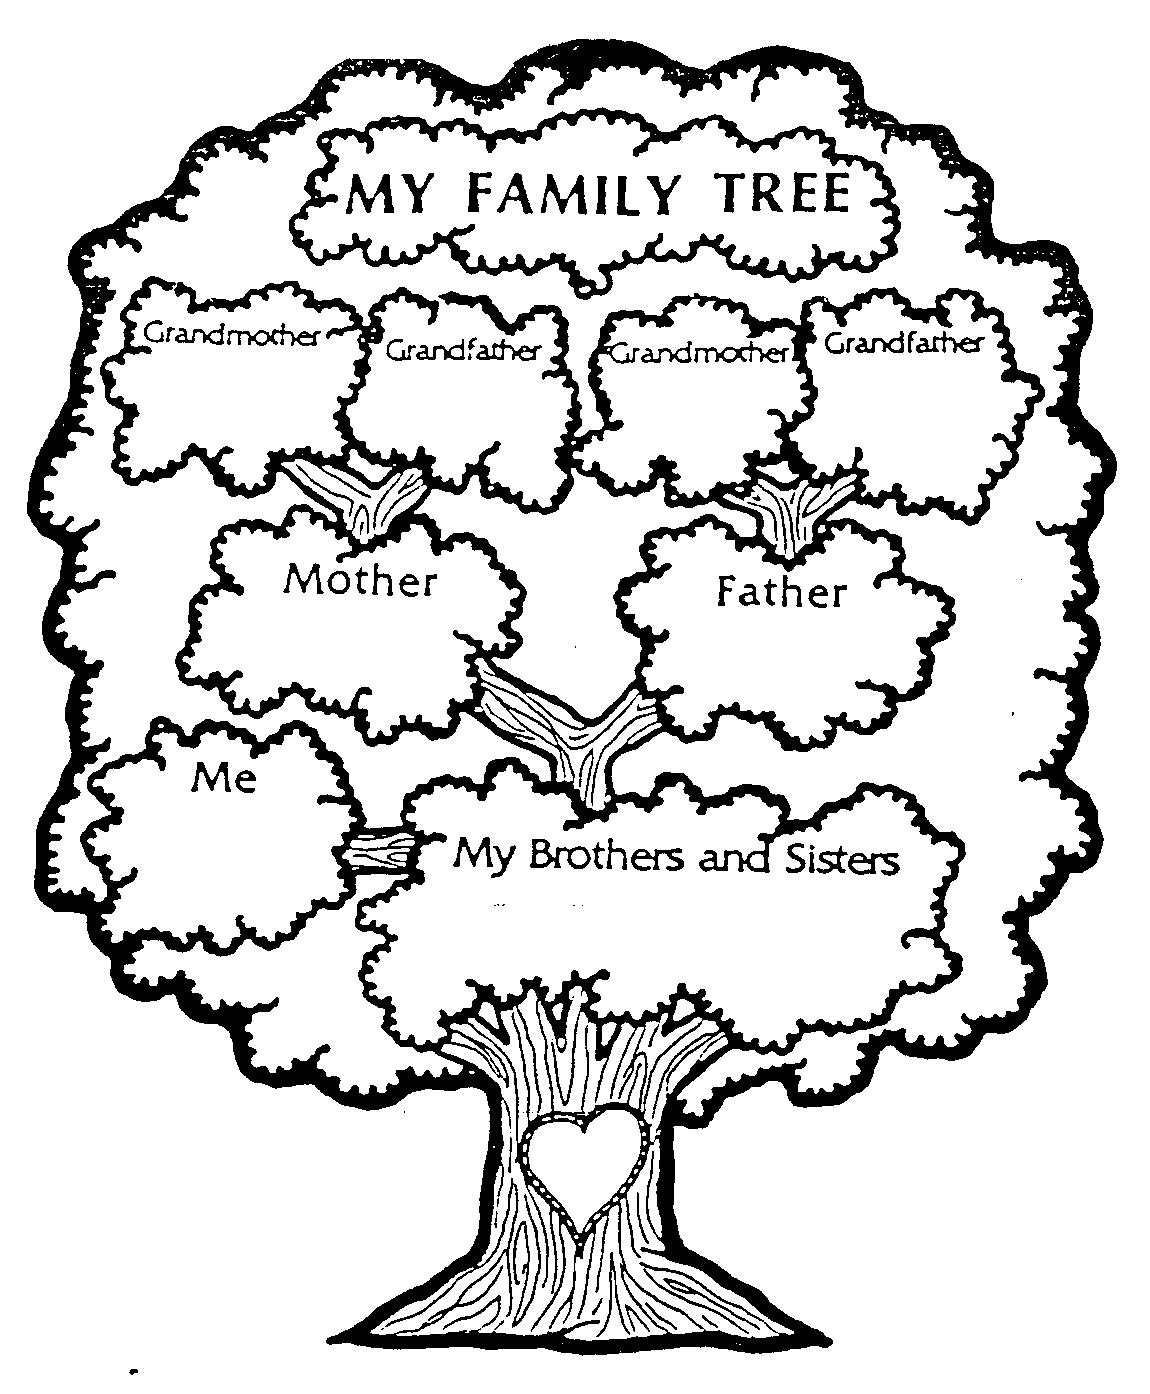 Teaching Your Children About The Family Tree And Their Ancestors